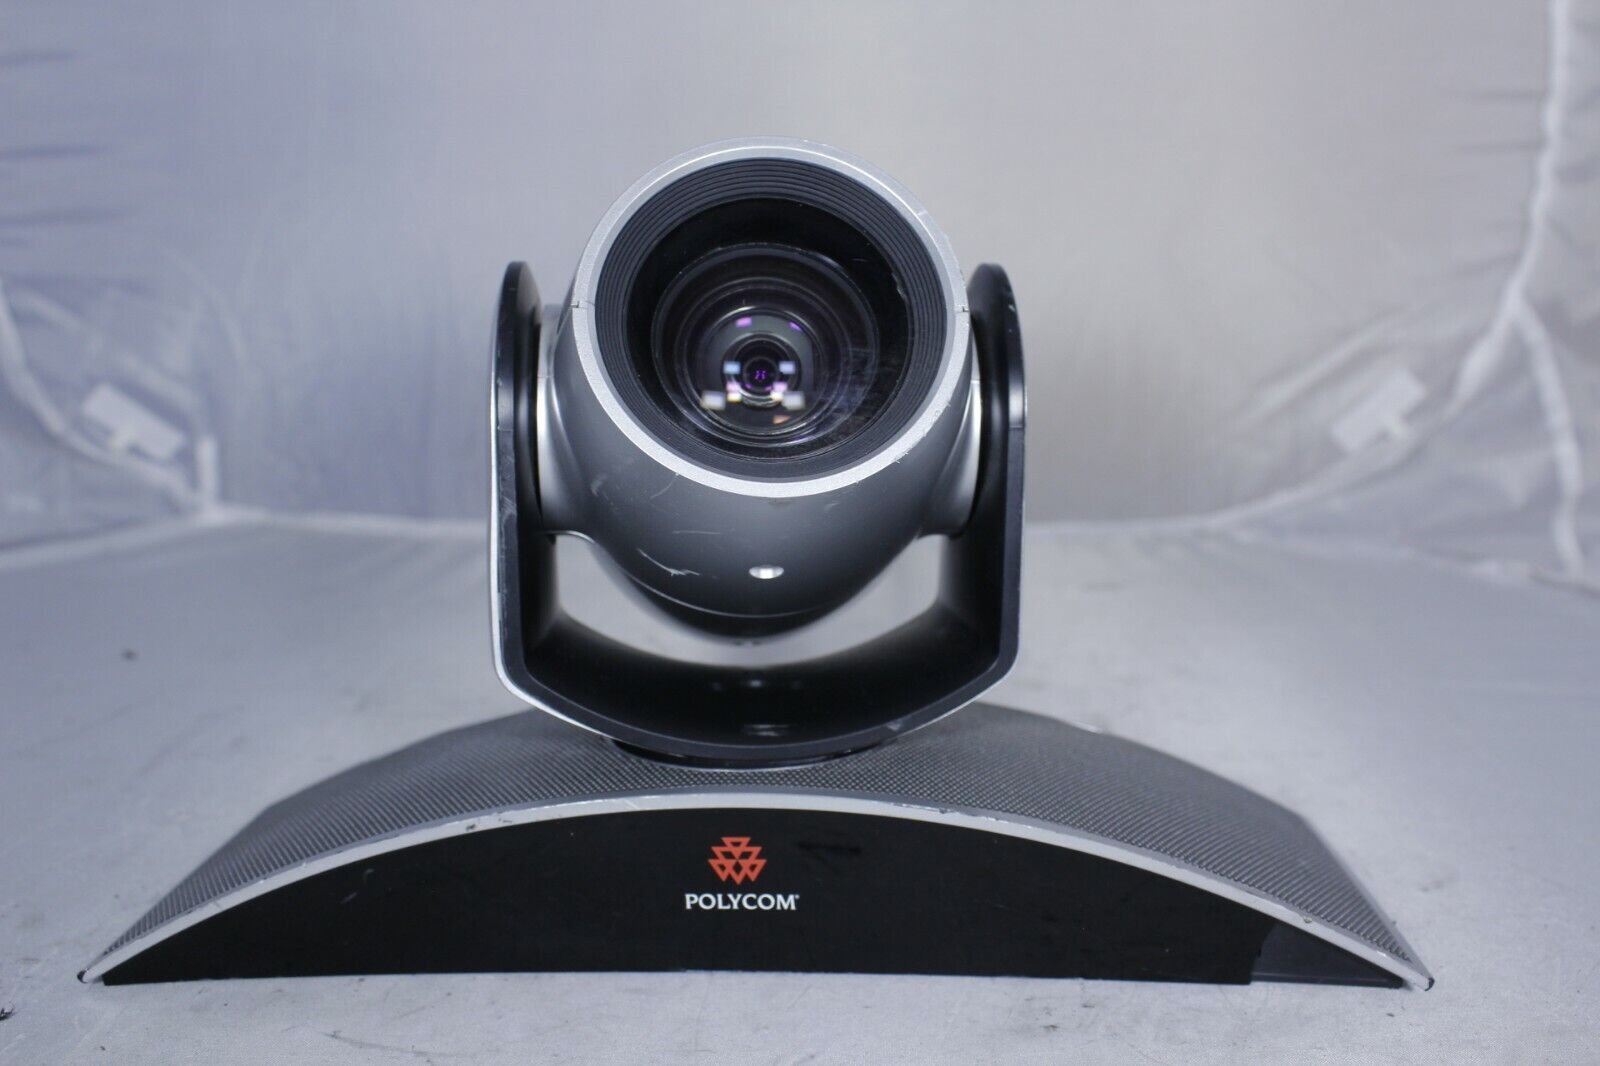 POLYCOM MPTZ-9 Challenge the lowest price of unisex Japan HD VIDEO 1080P CAMERA CONFERENCE